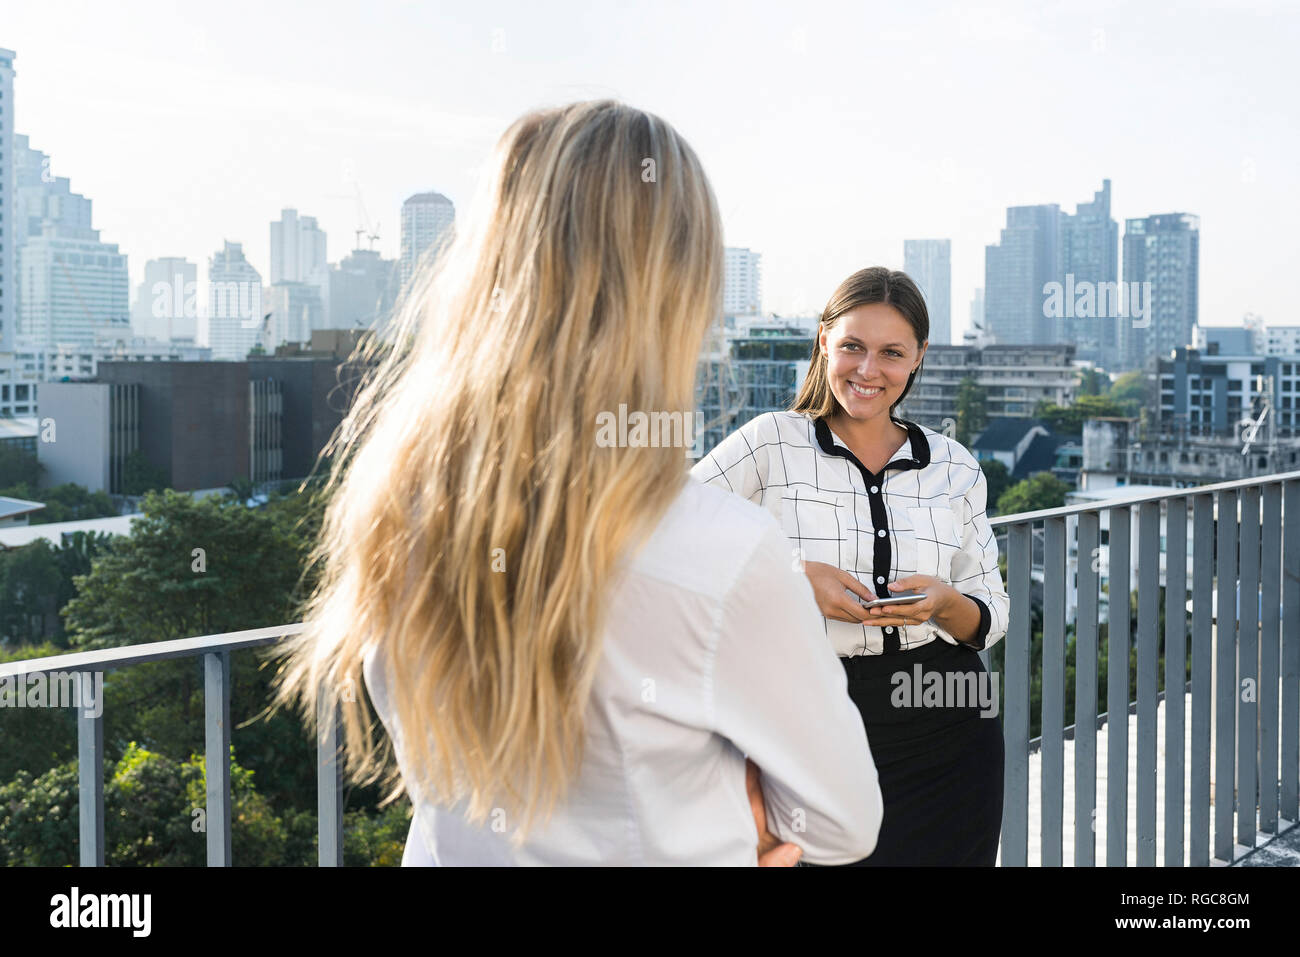 Two female colleagues speaking with each other on city rooftop Stock Photo